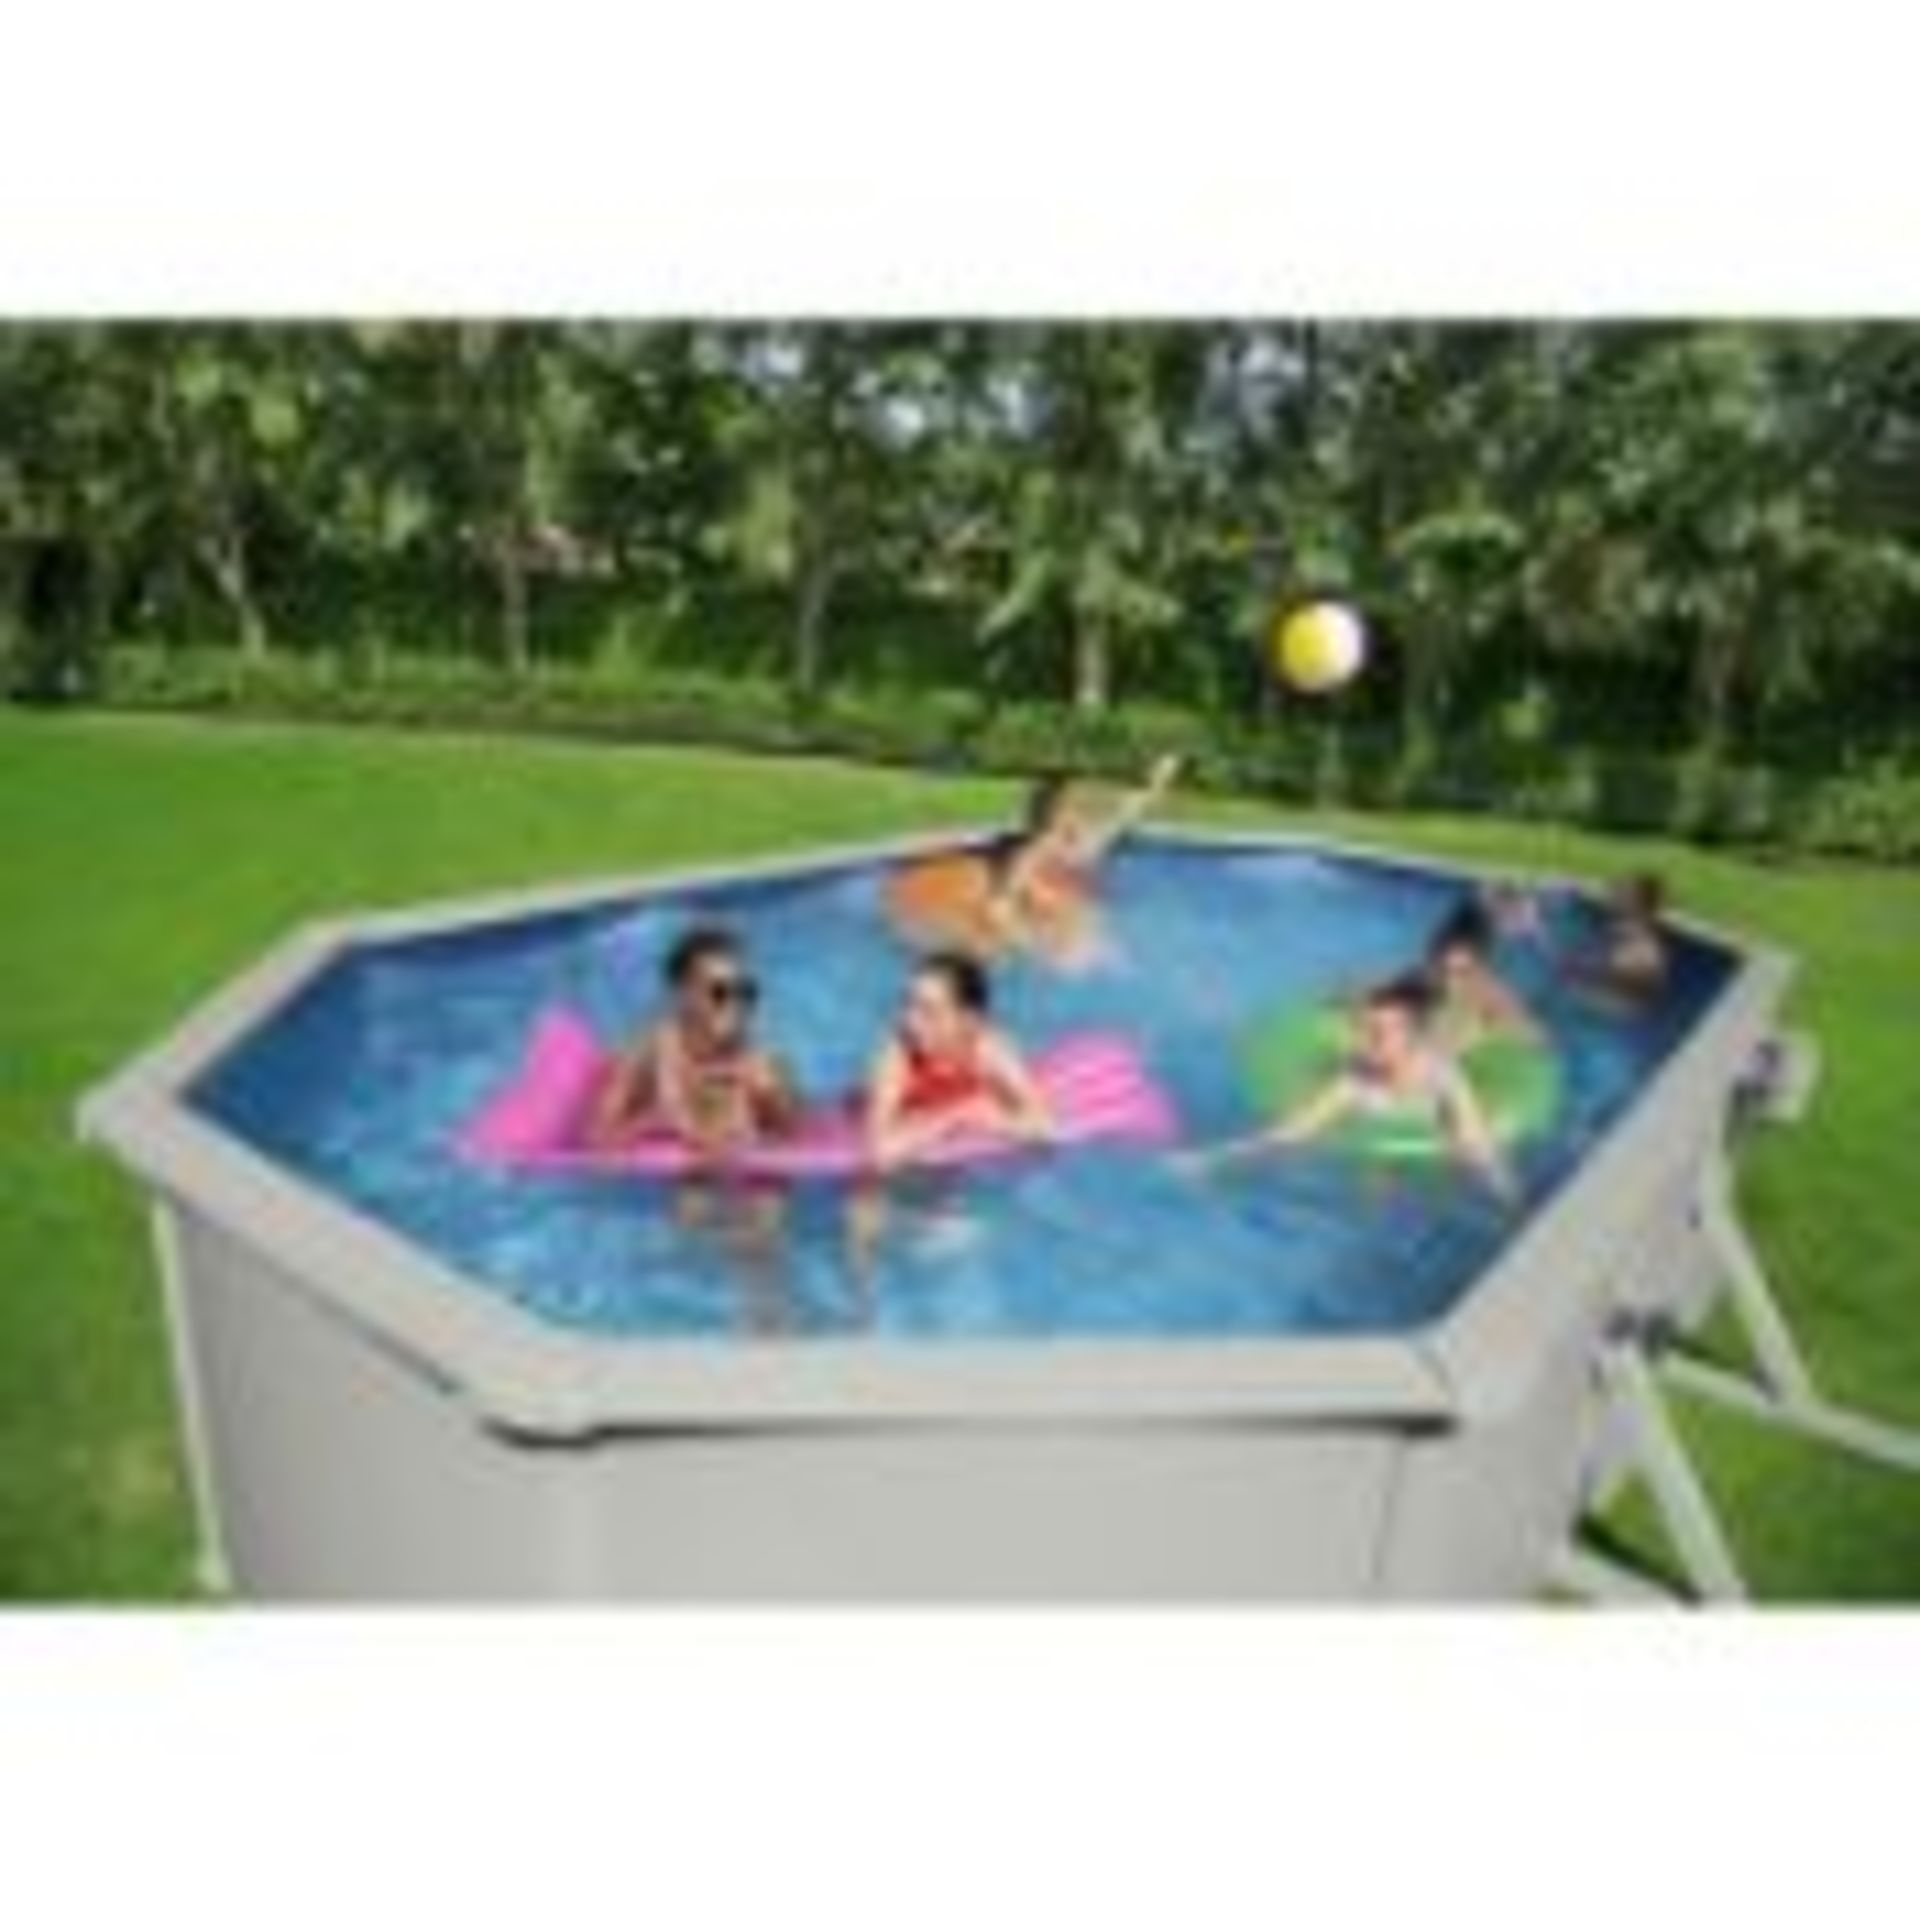 RRP £2400 Brand new Factory Sealed Bestway 56369 Hydrium Oval Above Ground Pool 610x360x120cm